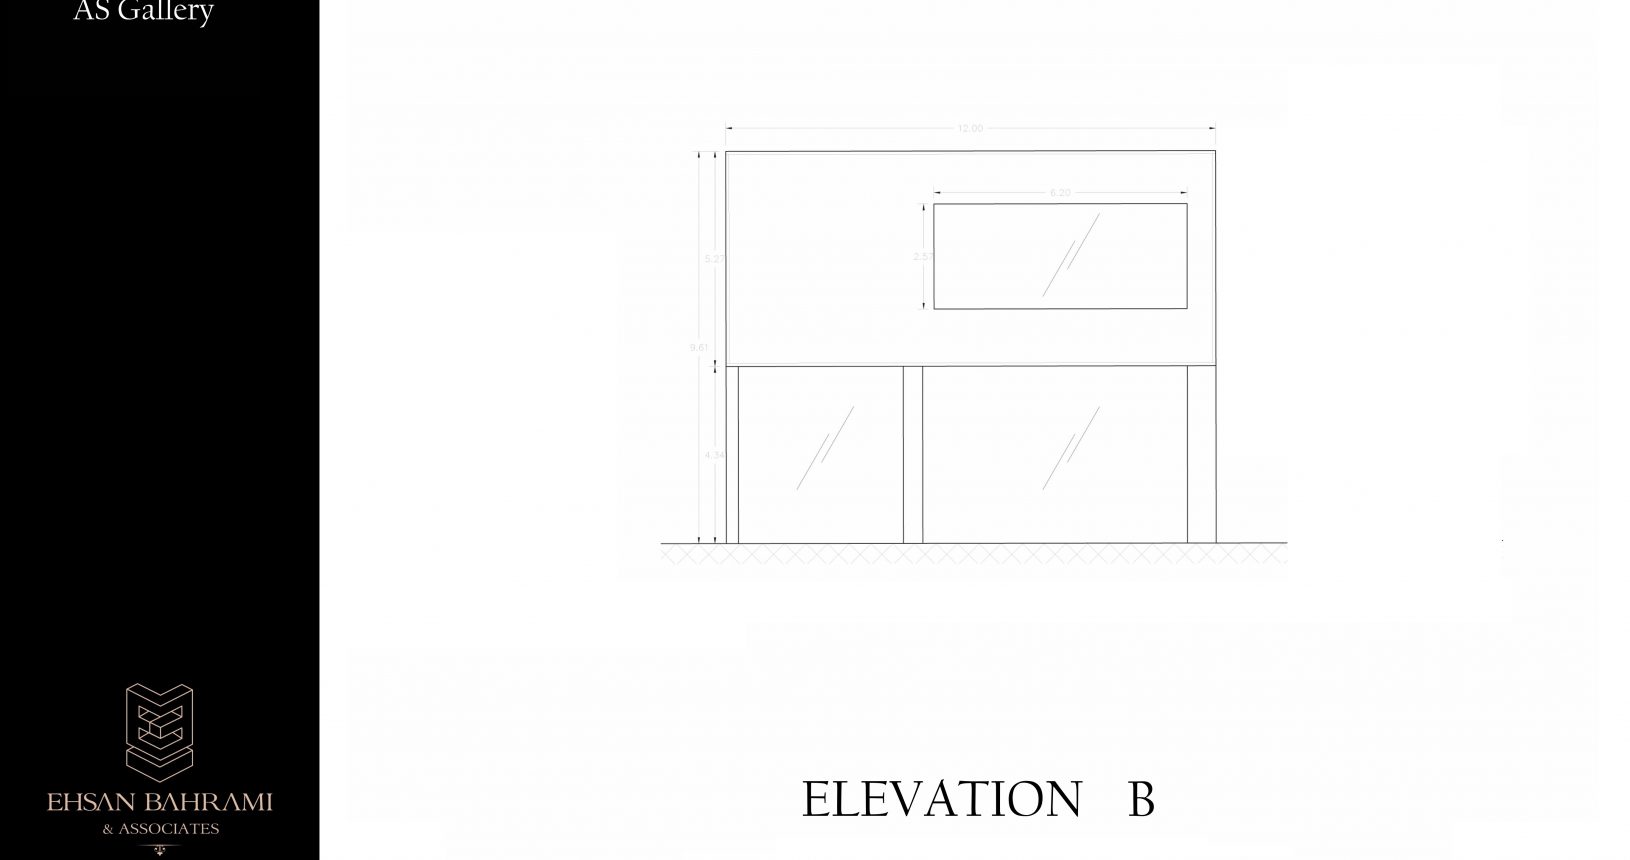 As Auto Gallery ELEVATION B